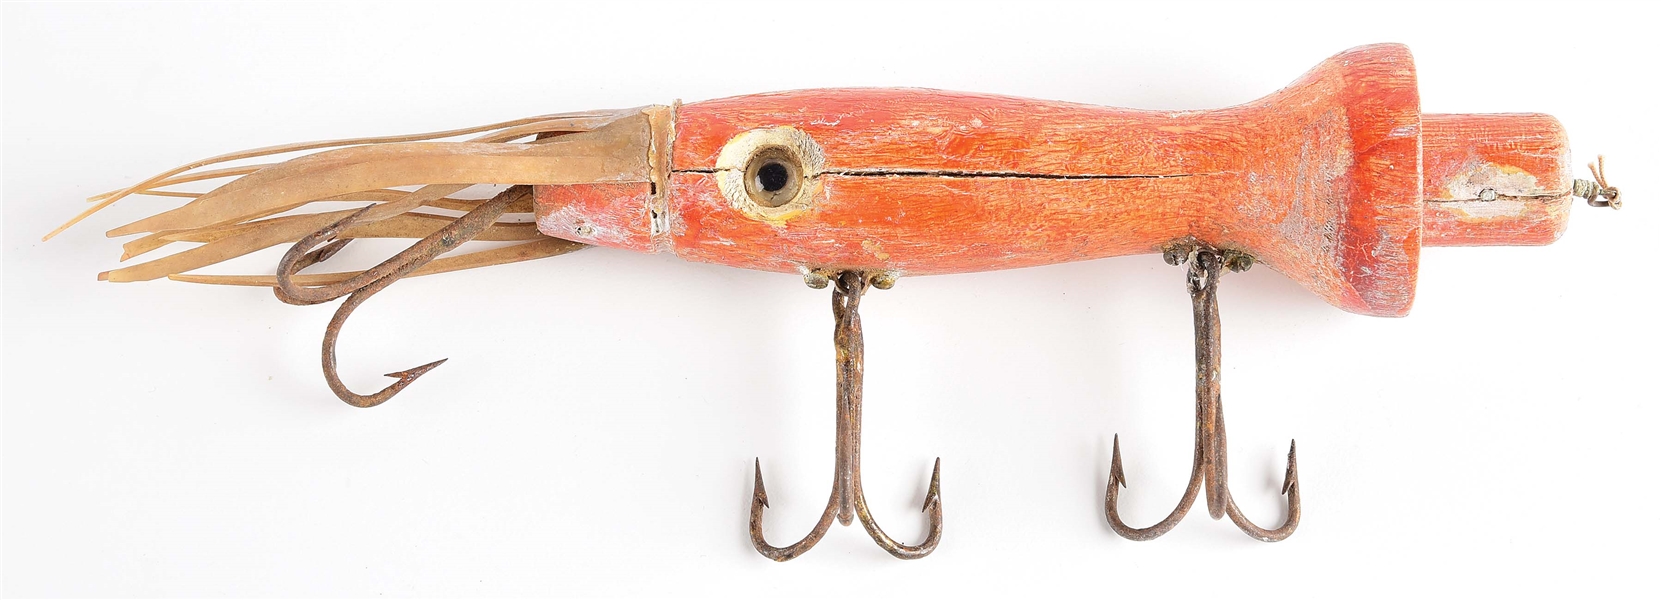 RUSSO SQUID WITH PROTOTYPE FISHING LURE.